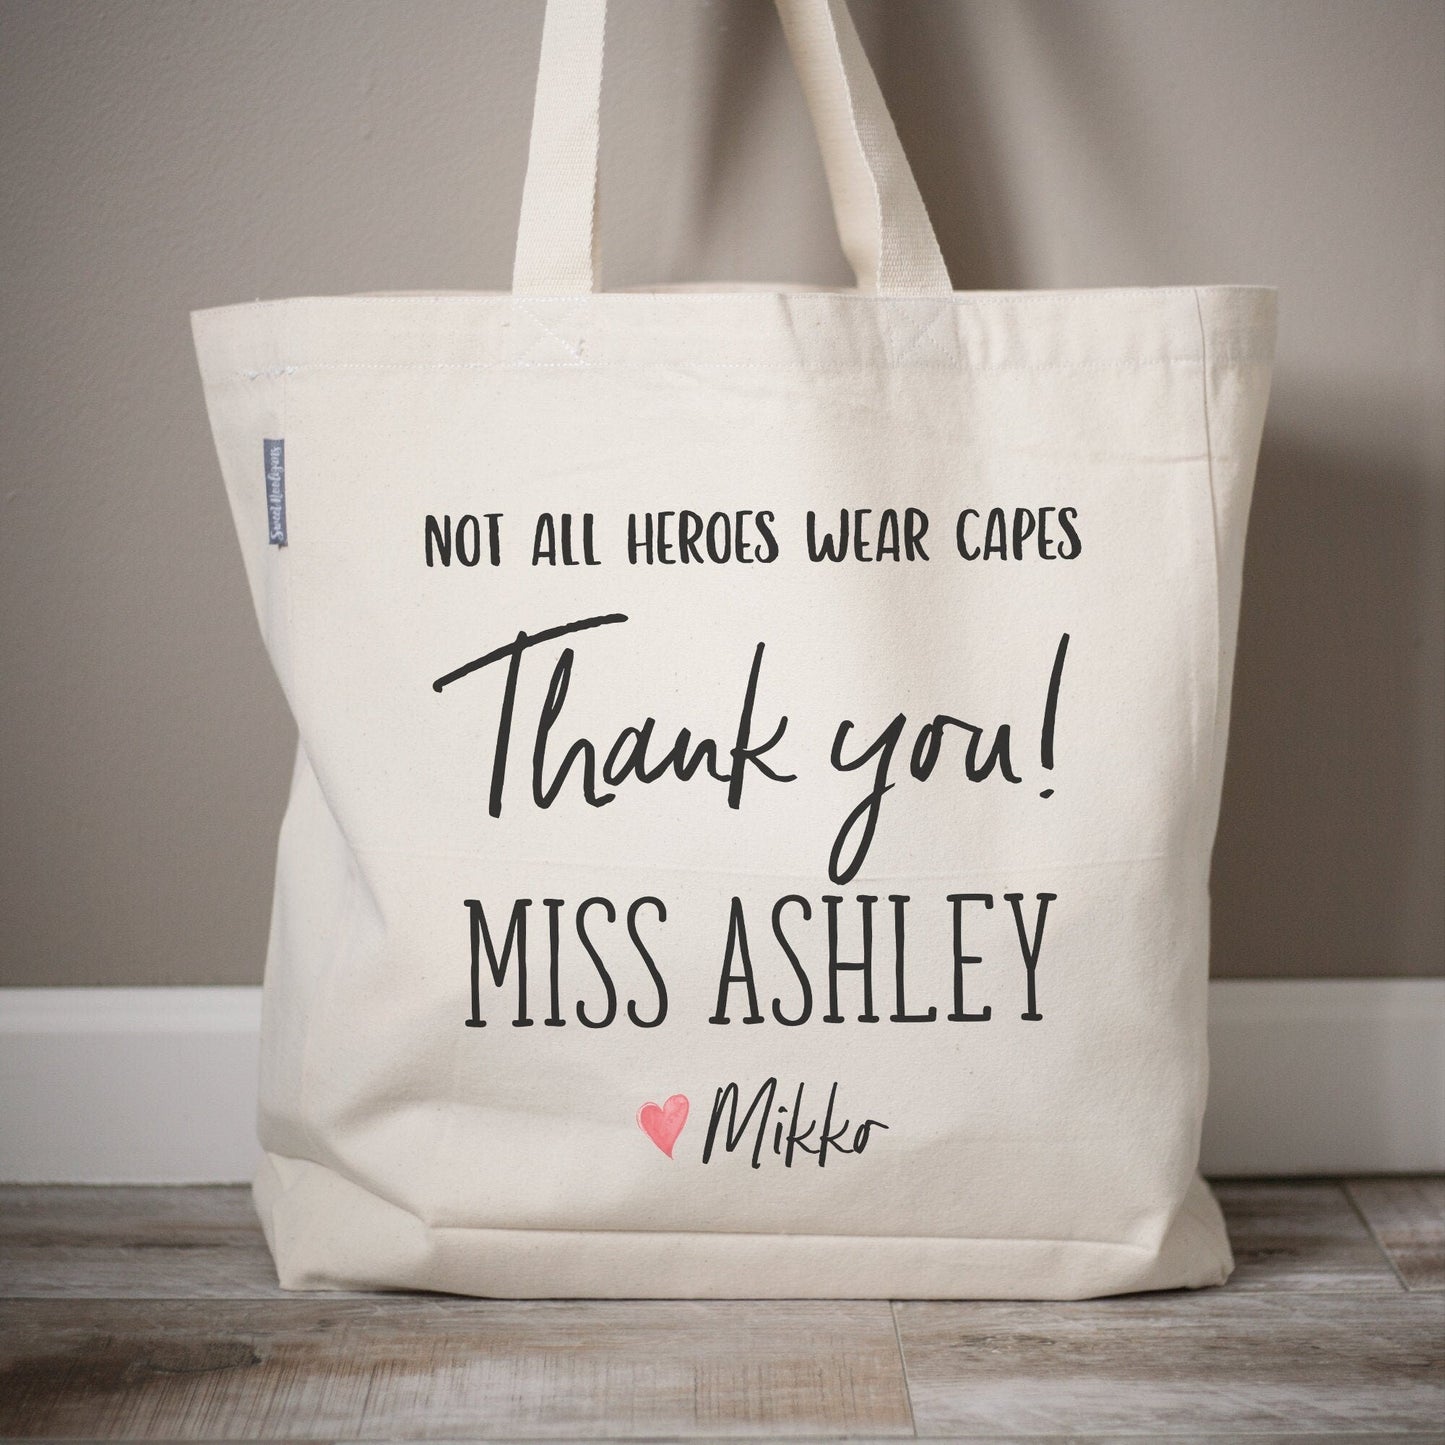 Load image into Gallery viewer, Unique Nurse Tote Bag Appreciation Gift | RN Personalized Appreciation Tote Bag | Monogrammed Nursing Work Tote | Nursing Medical Staff Bag - Sweet Hooligans Design
